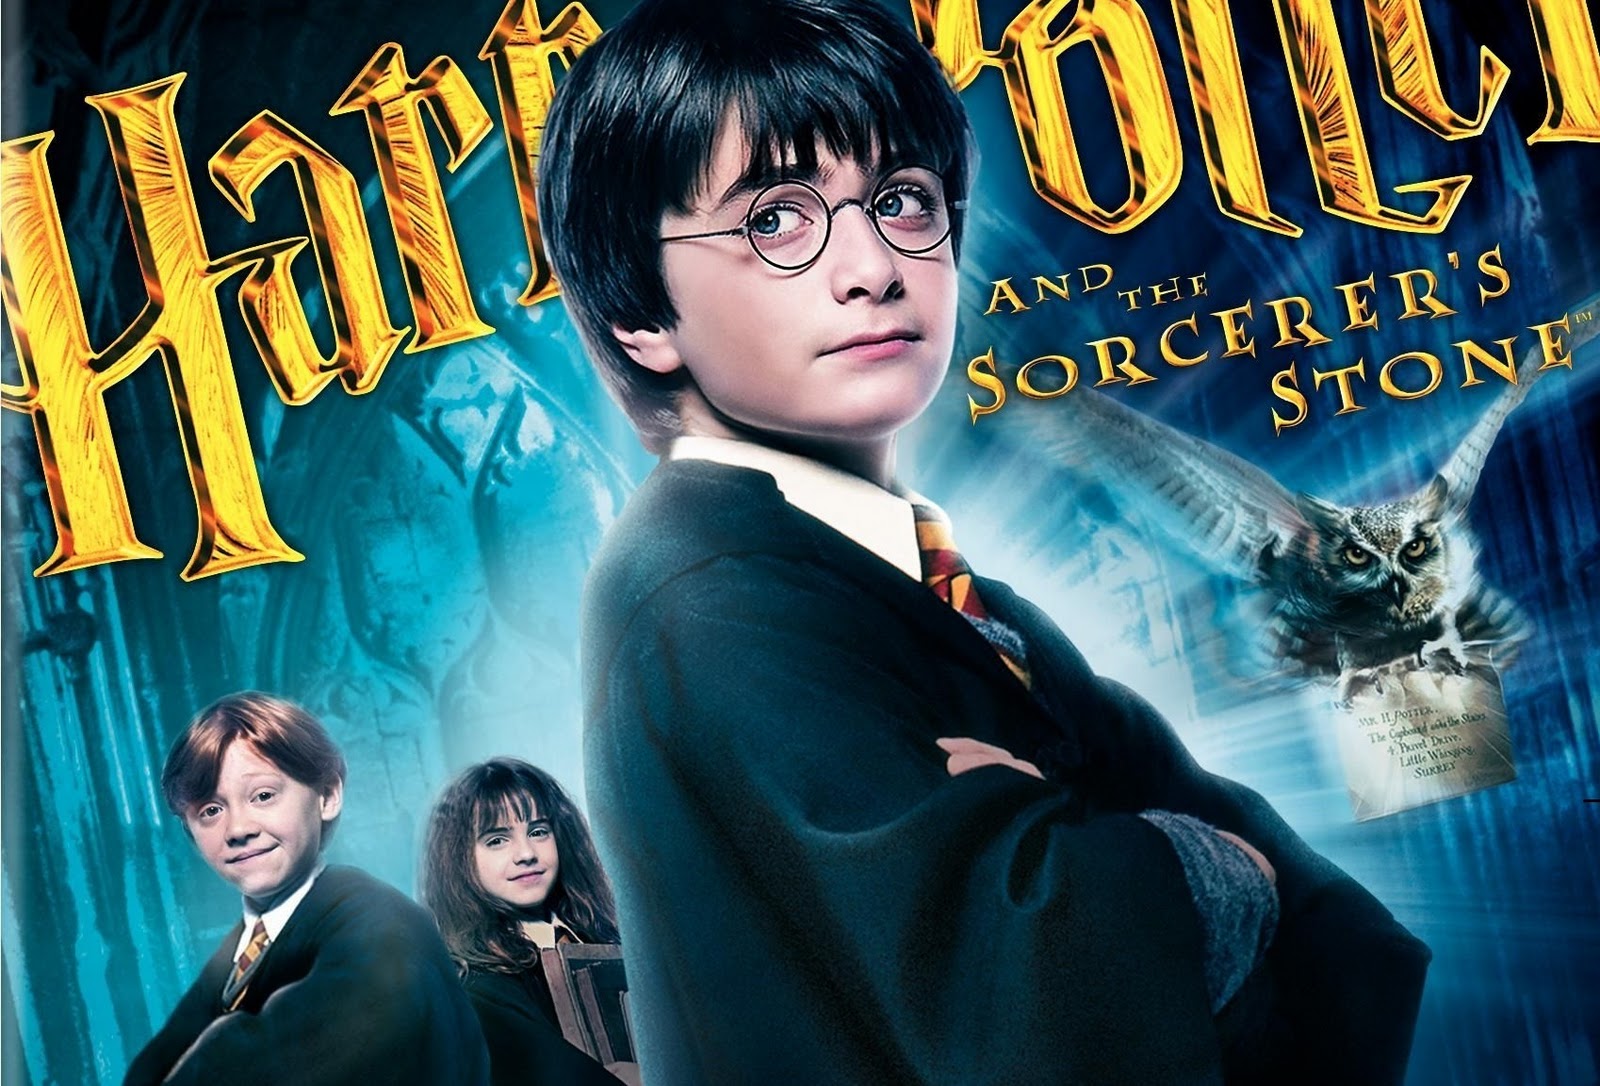 wallpaper do harry potter,movie,album cover,poster,fictional character,games